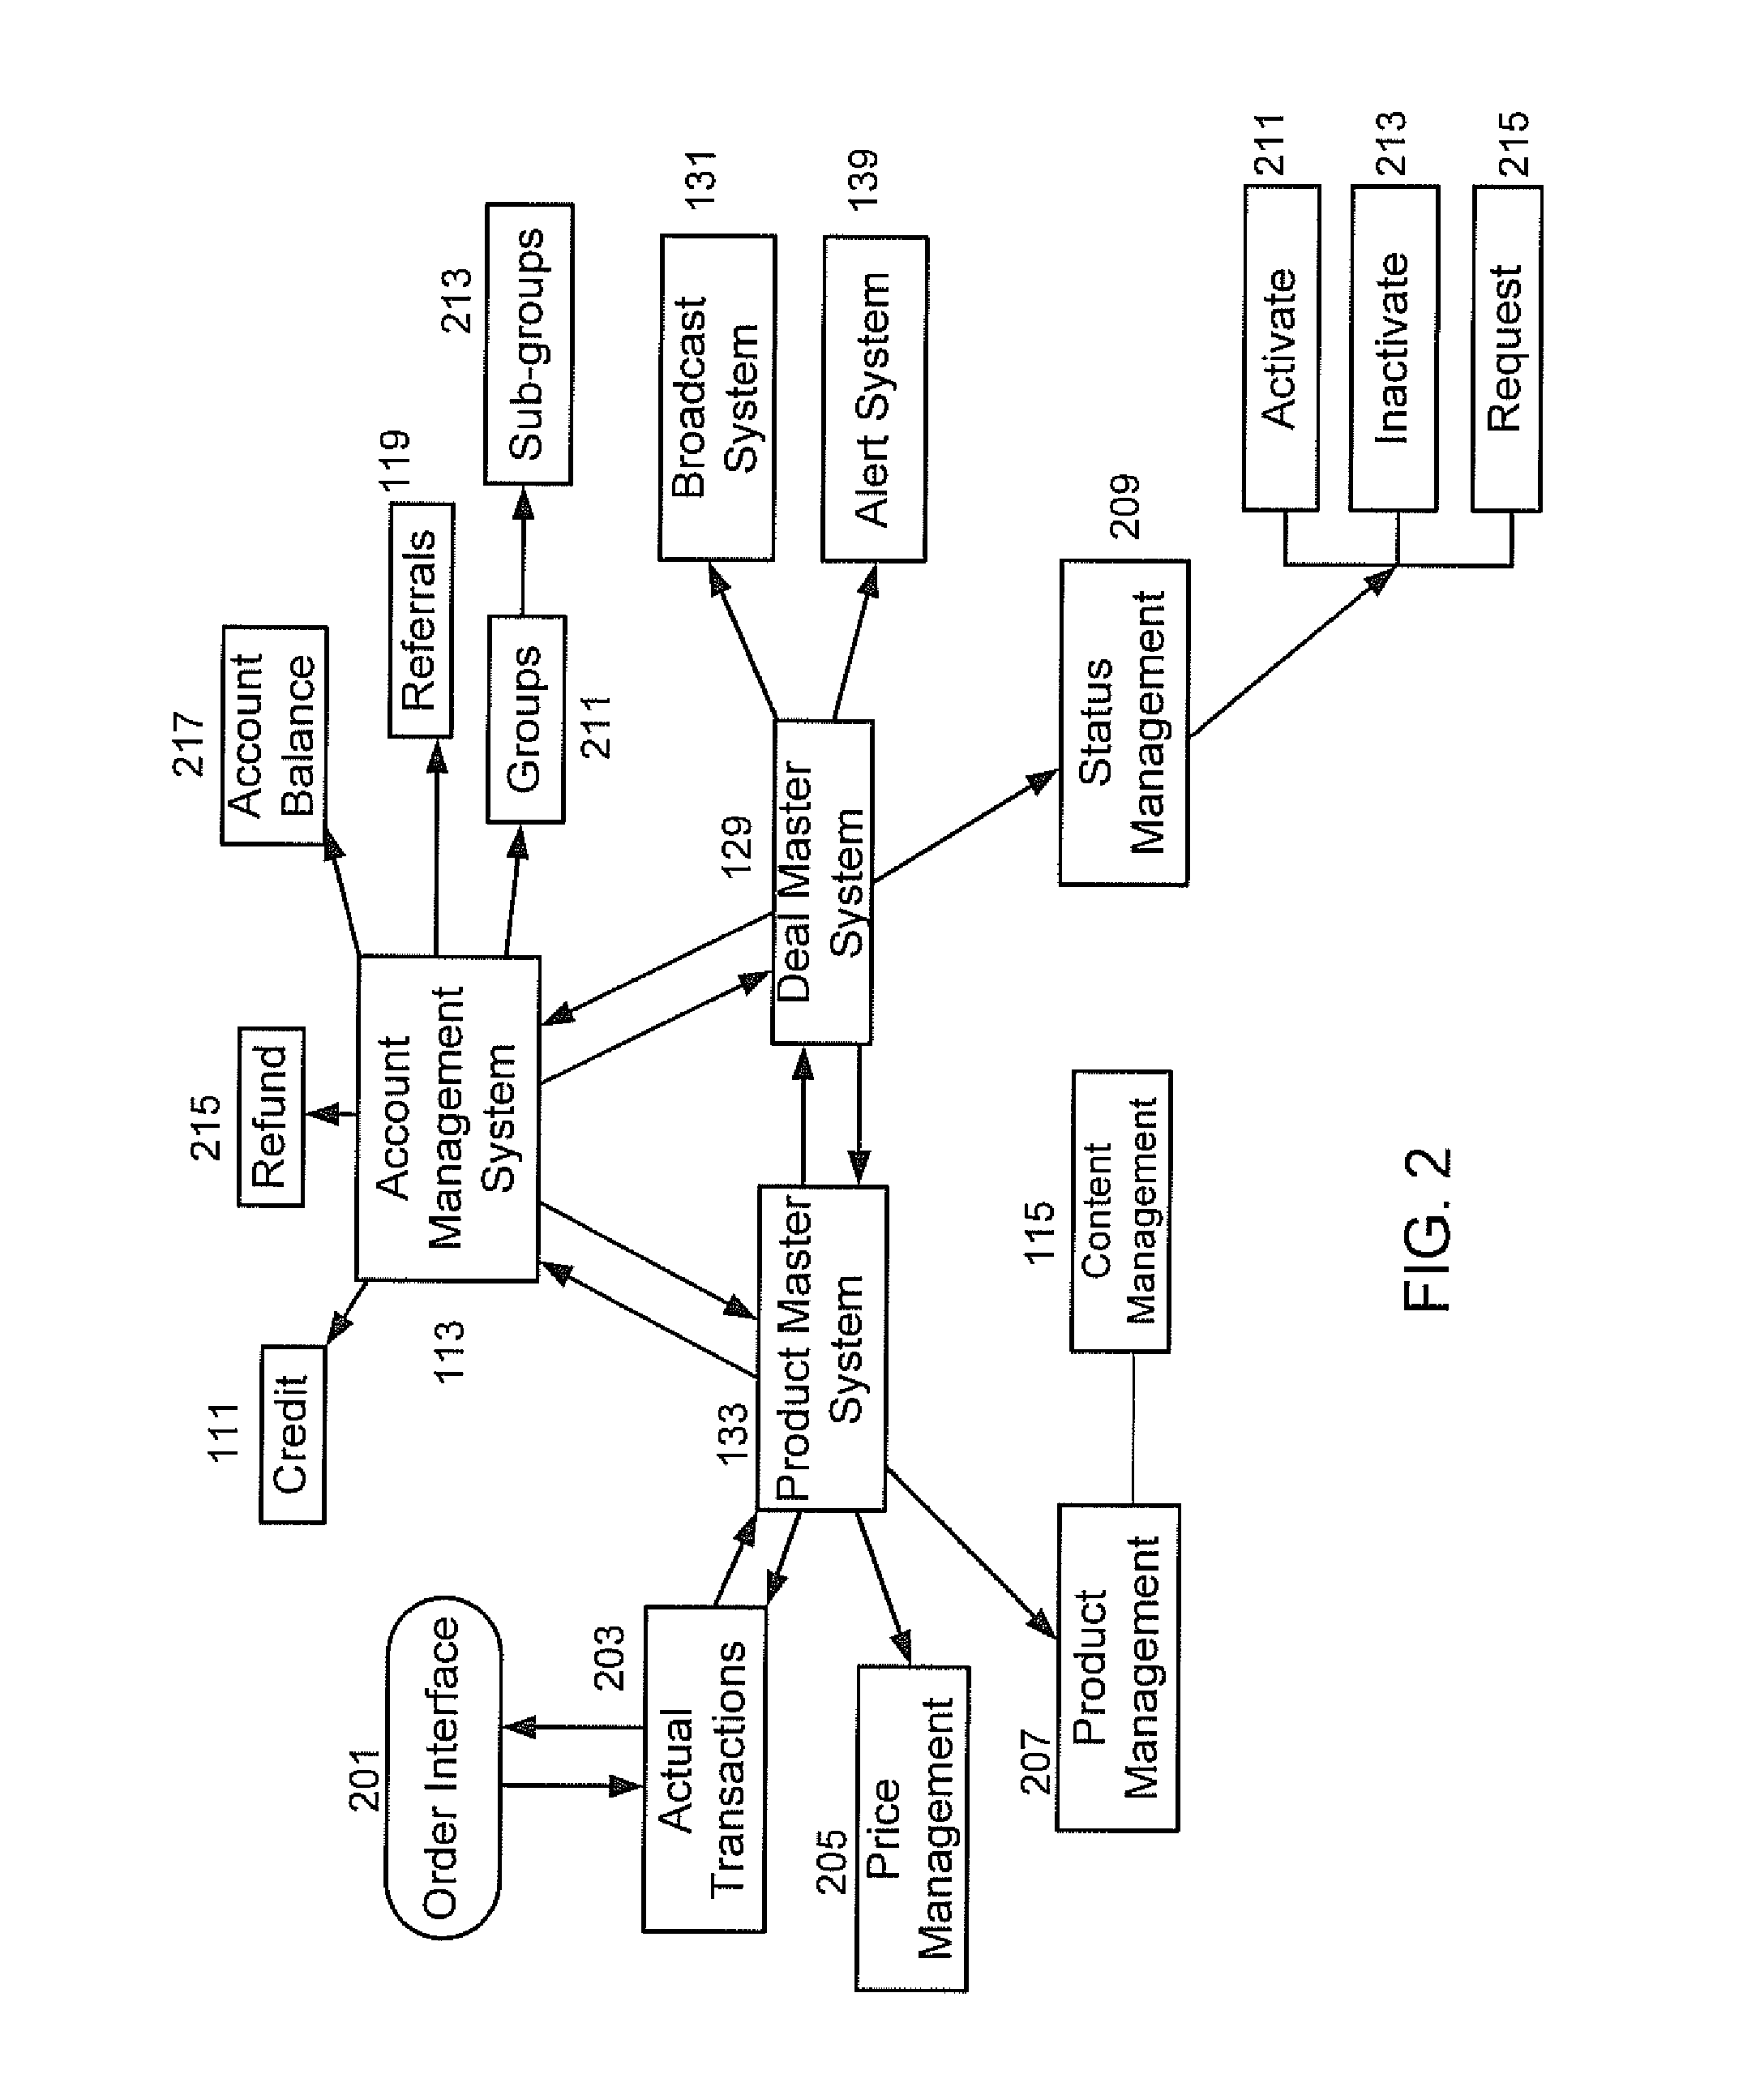 Electronic system and method for group purchasing promotions